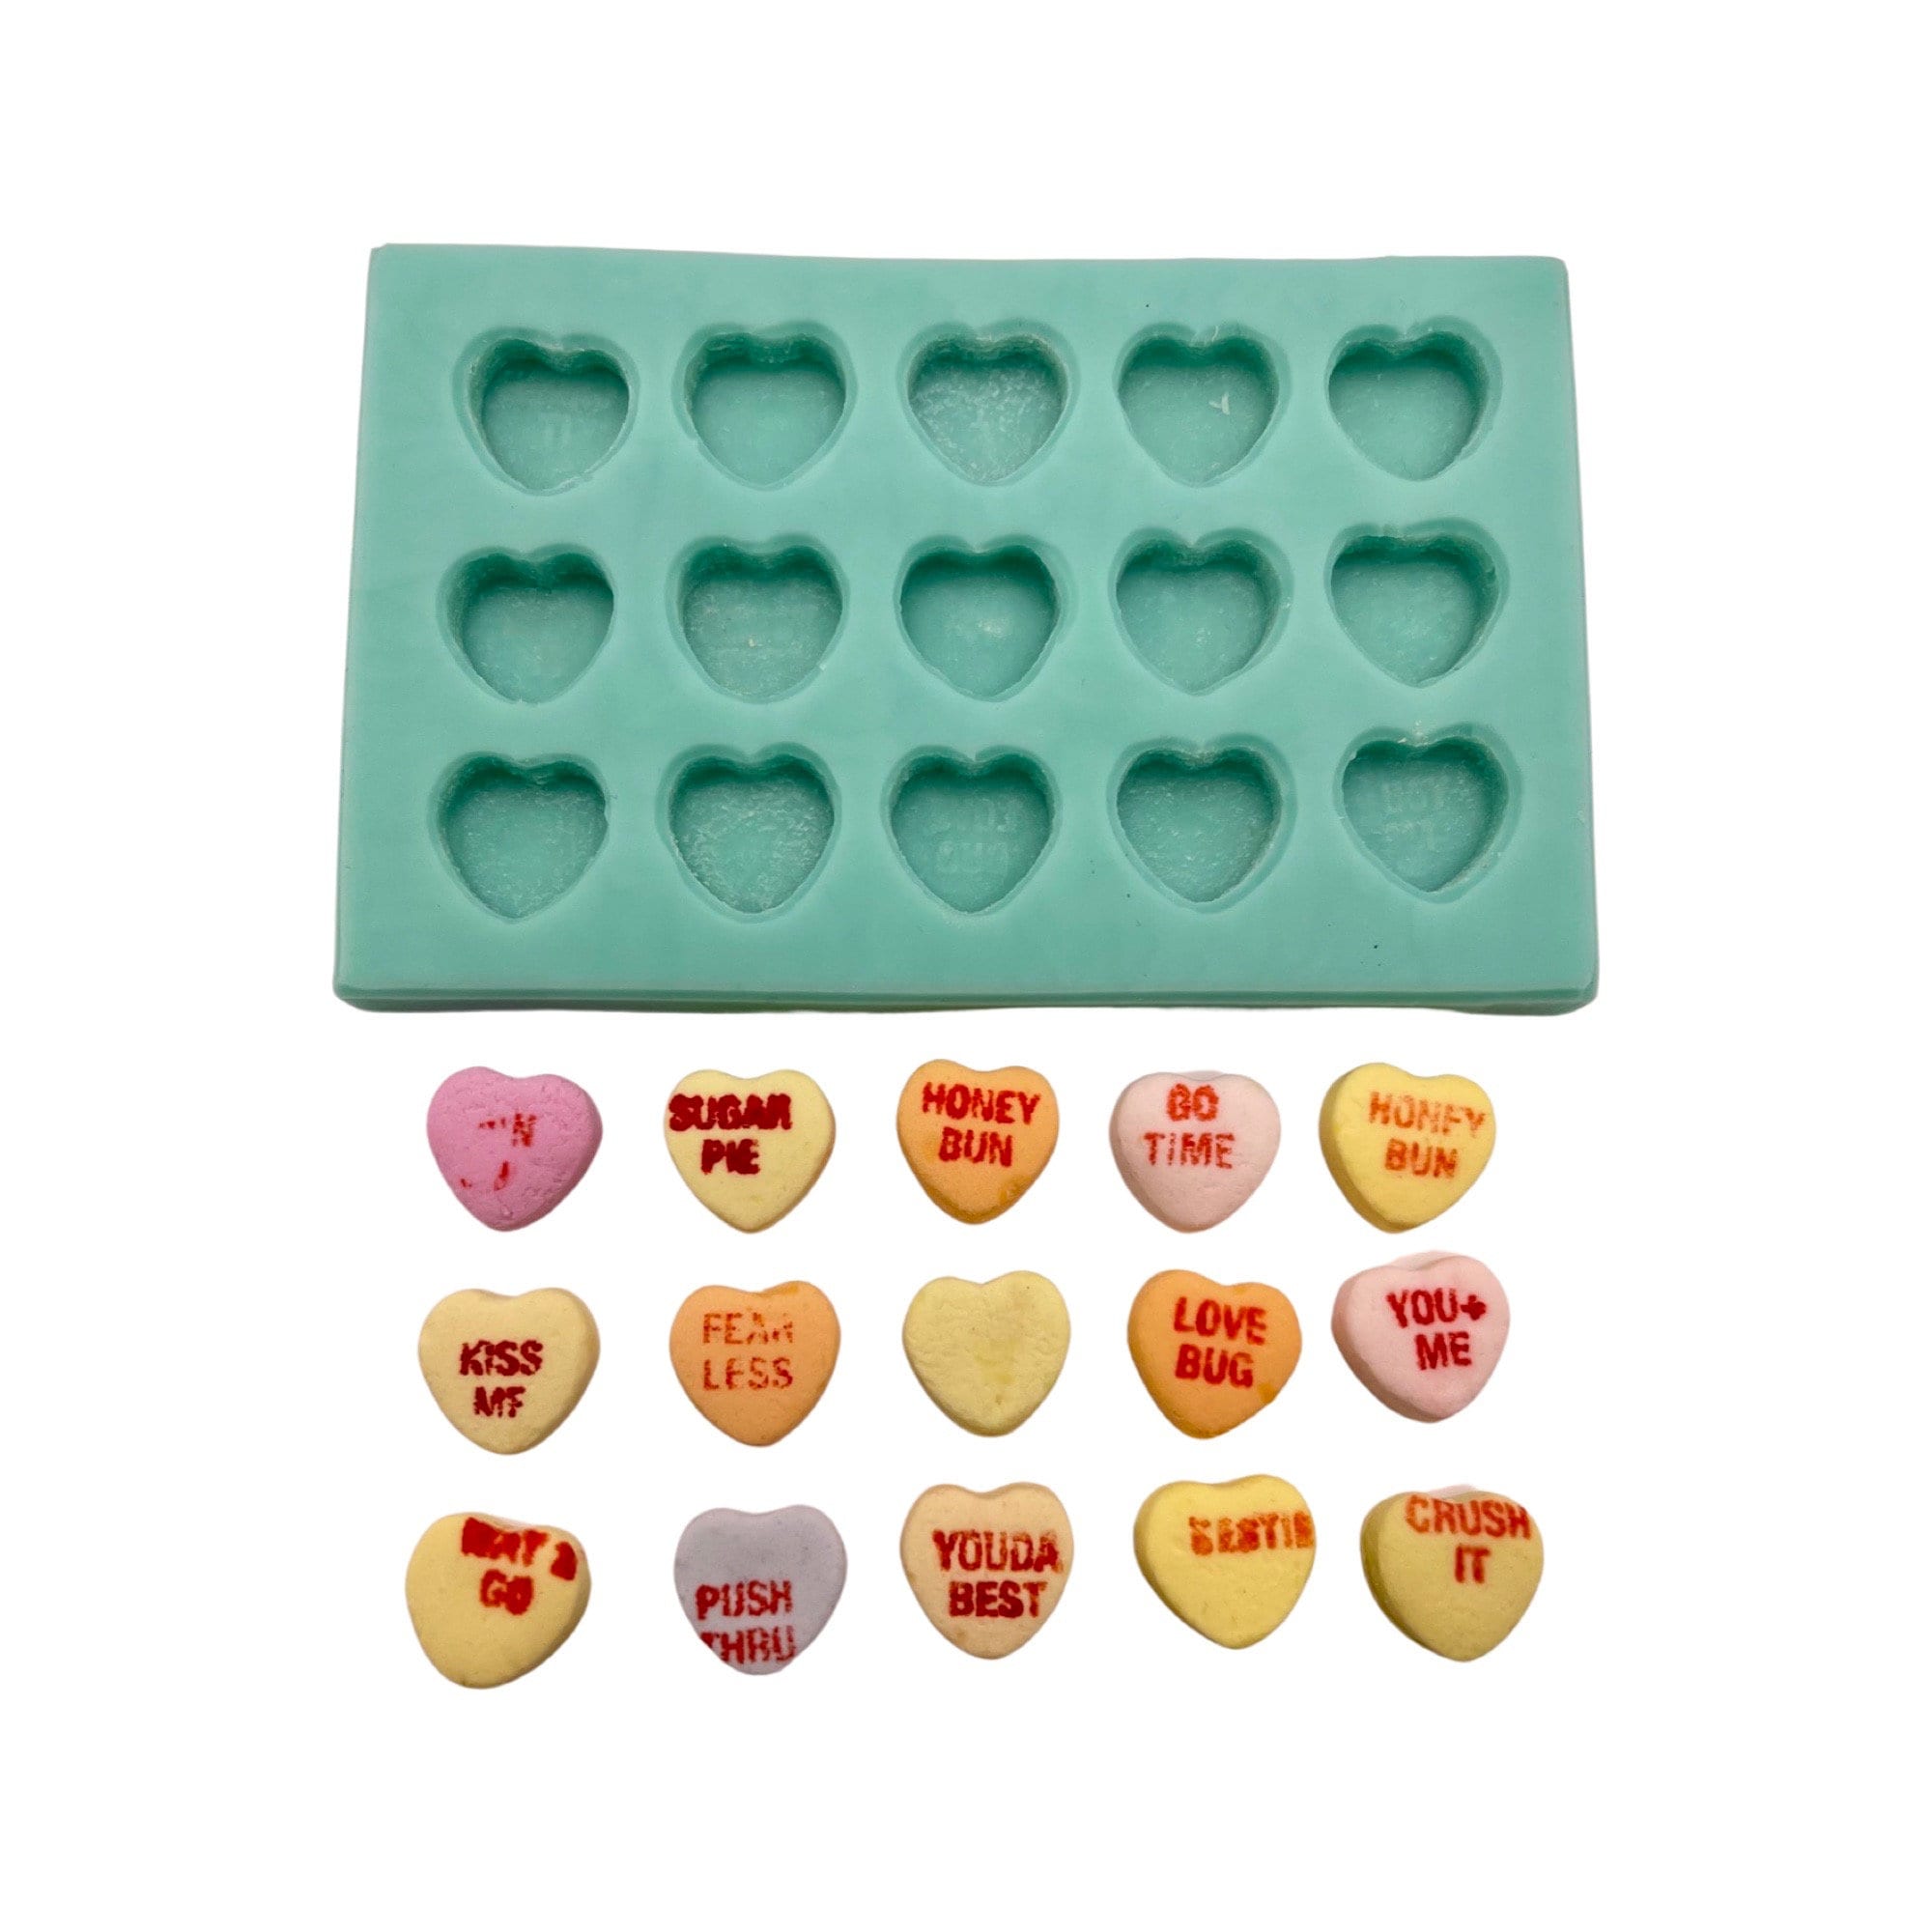 Candy Hearts Mold, Conversation Heart Candy Mold, Silicone Heart Mold